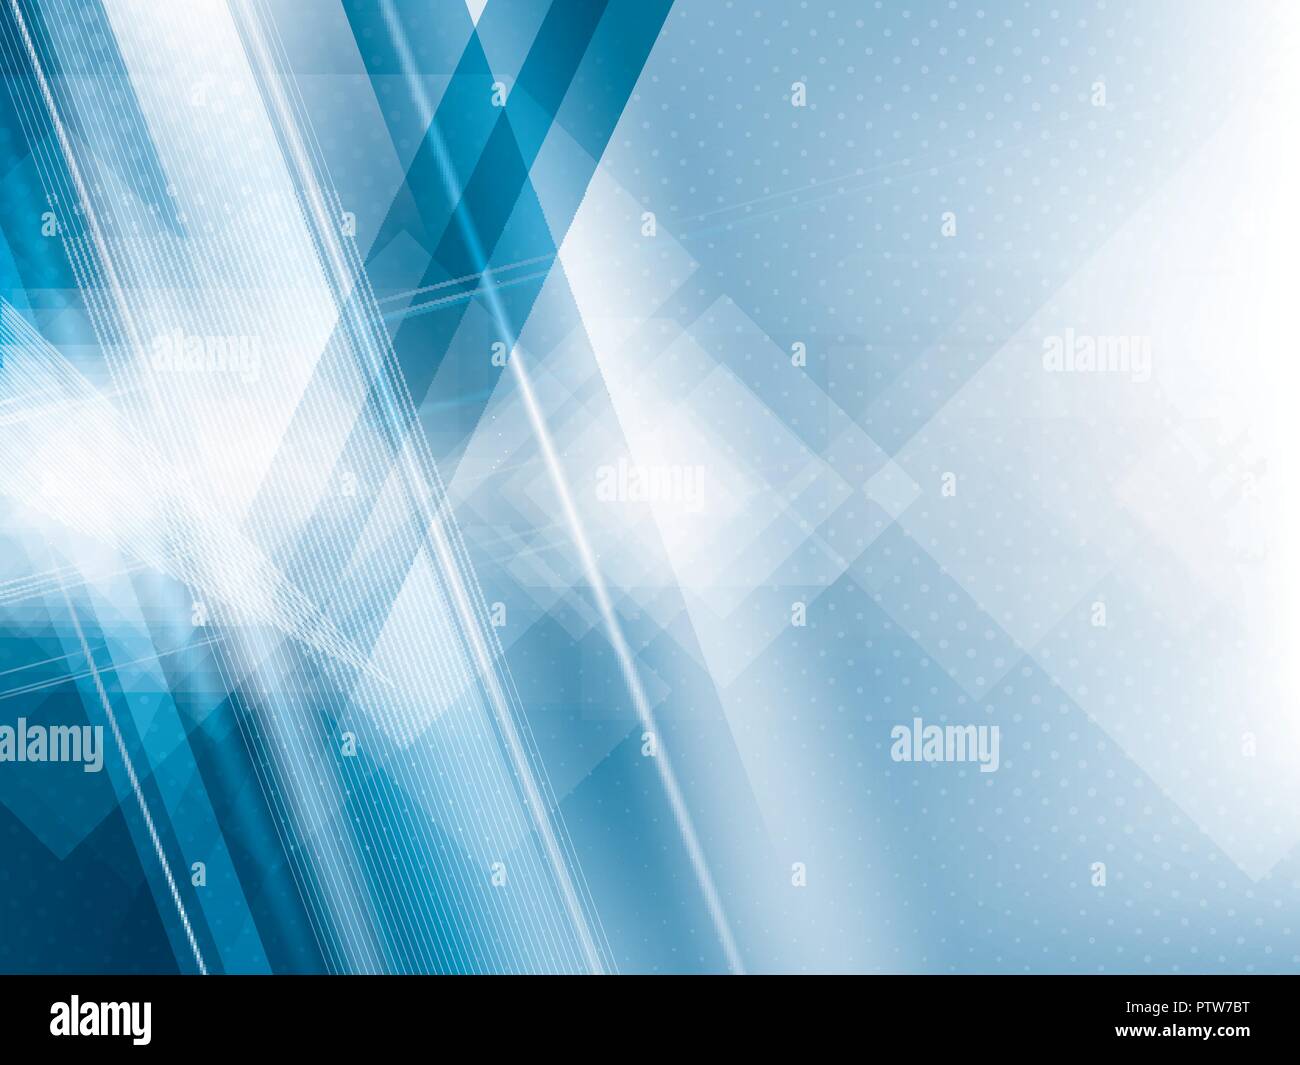 blue and white abstract wallpaper